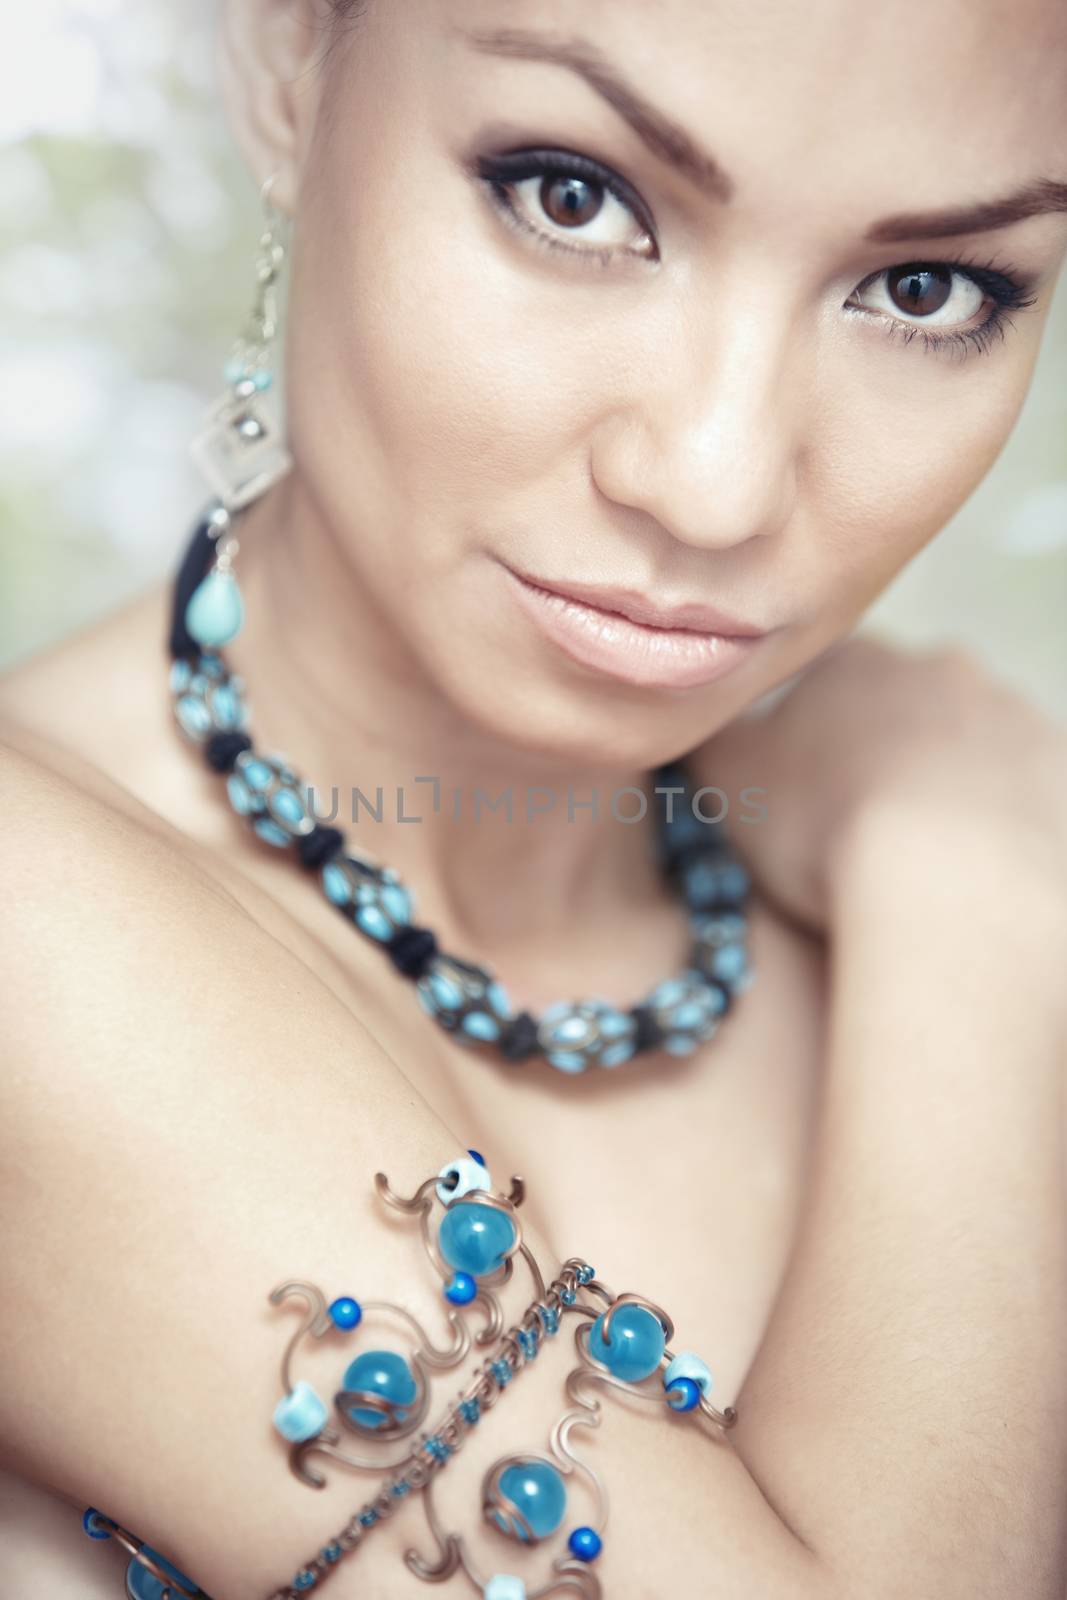 Woman with blue jewelry by Novic